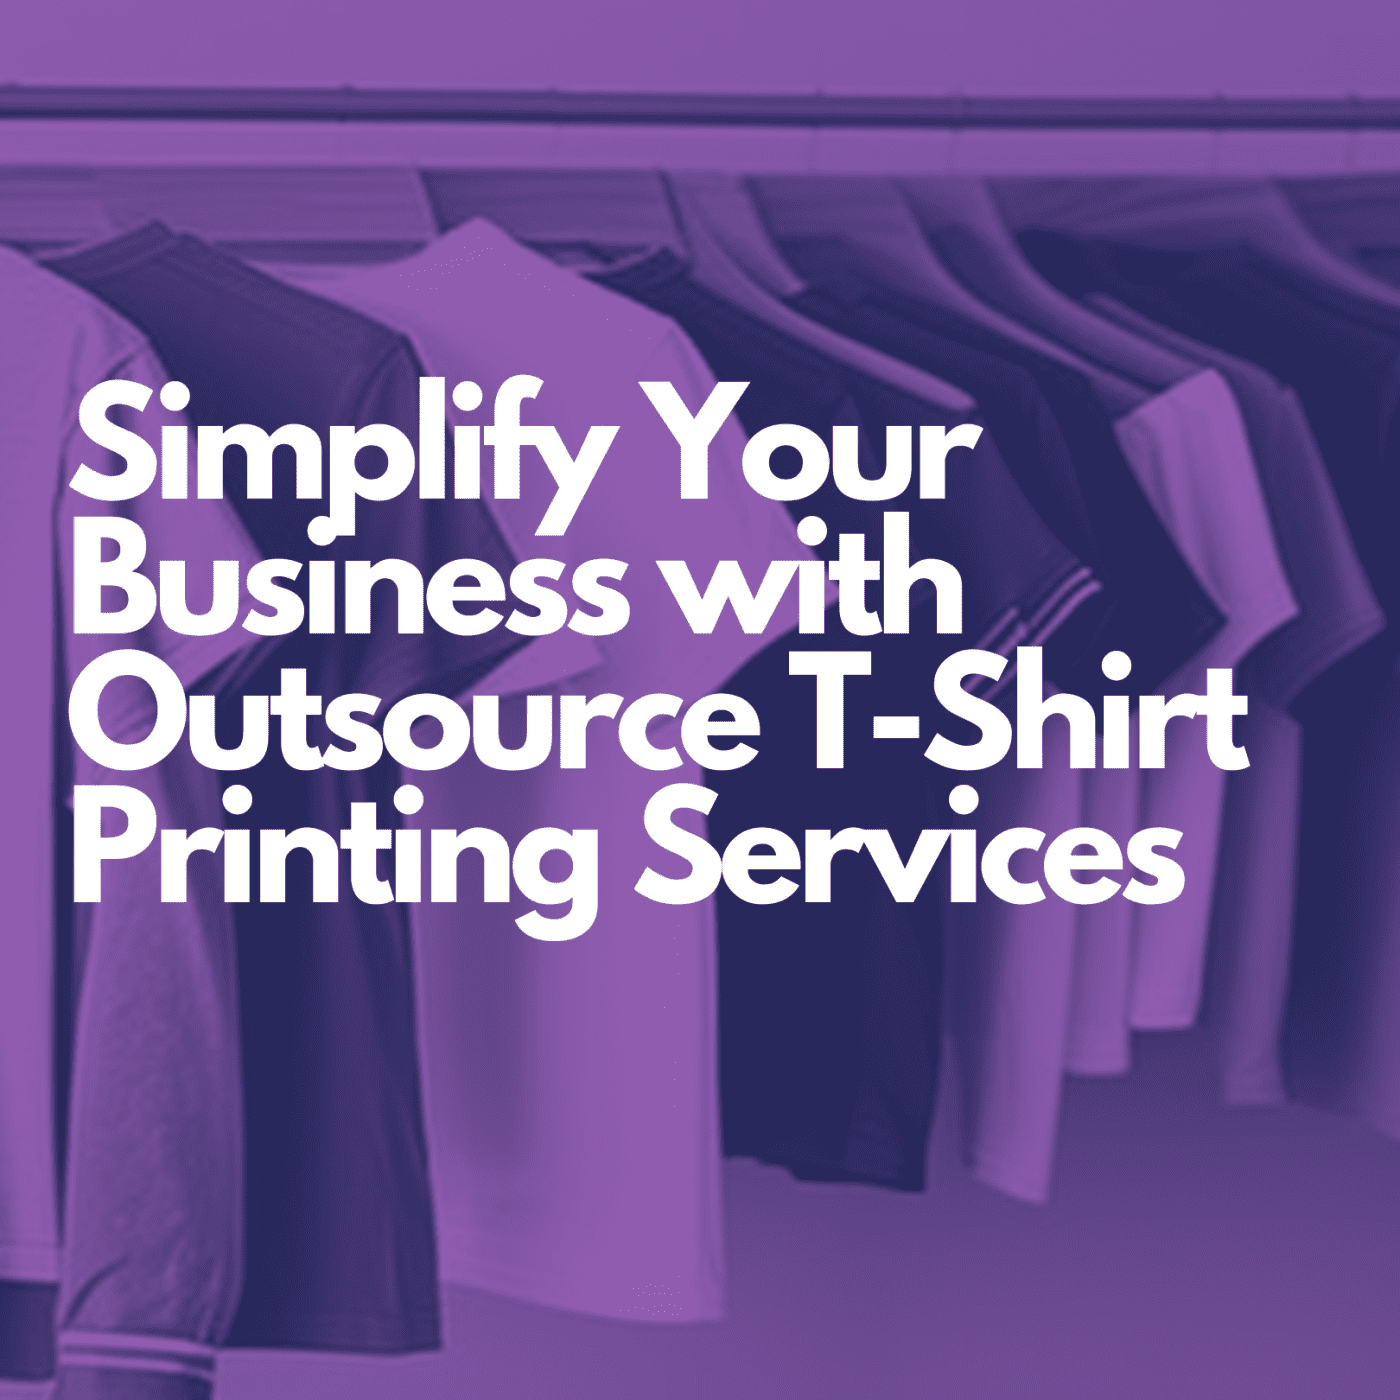 Simplify Your Business with Outsource T-Shirt Printing Services, custom t-shirts, t-shirt printing